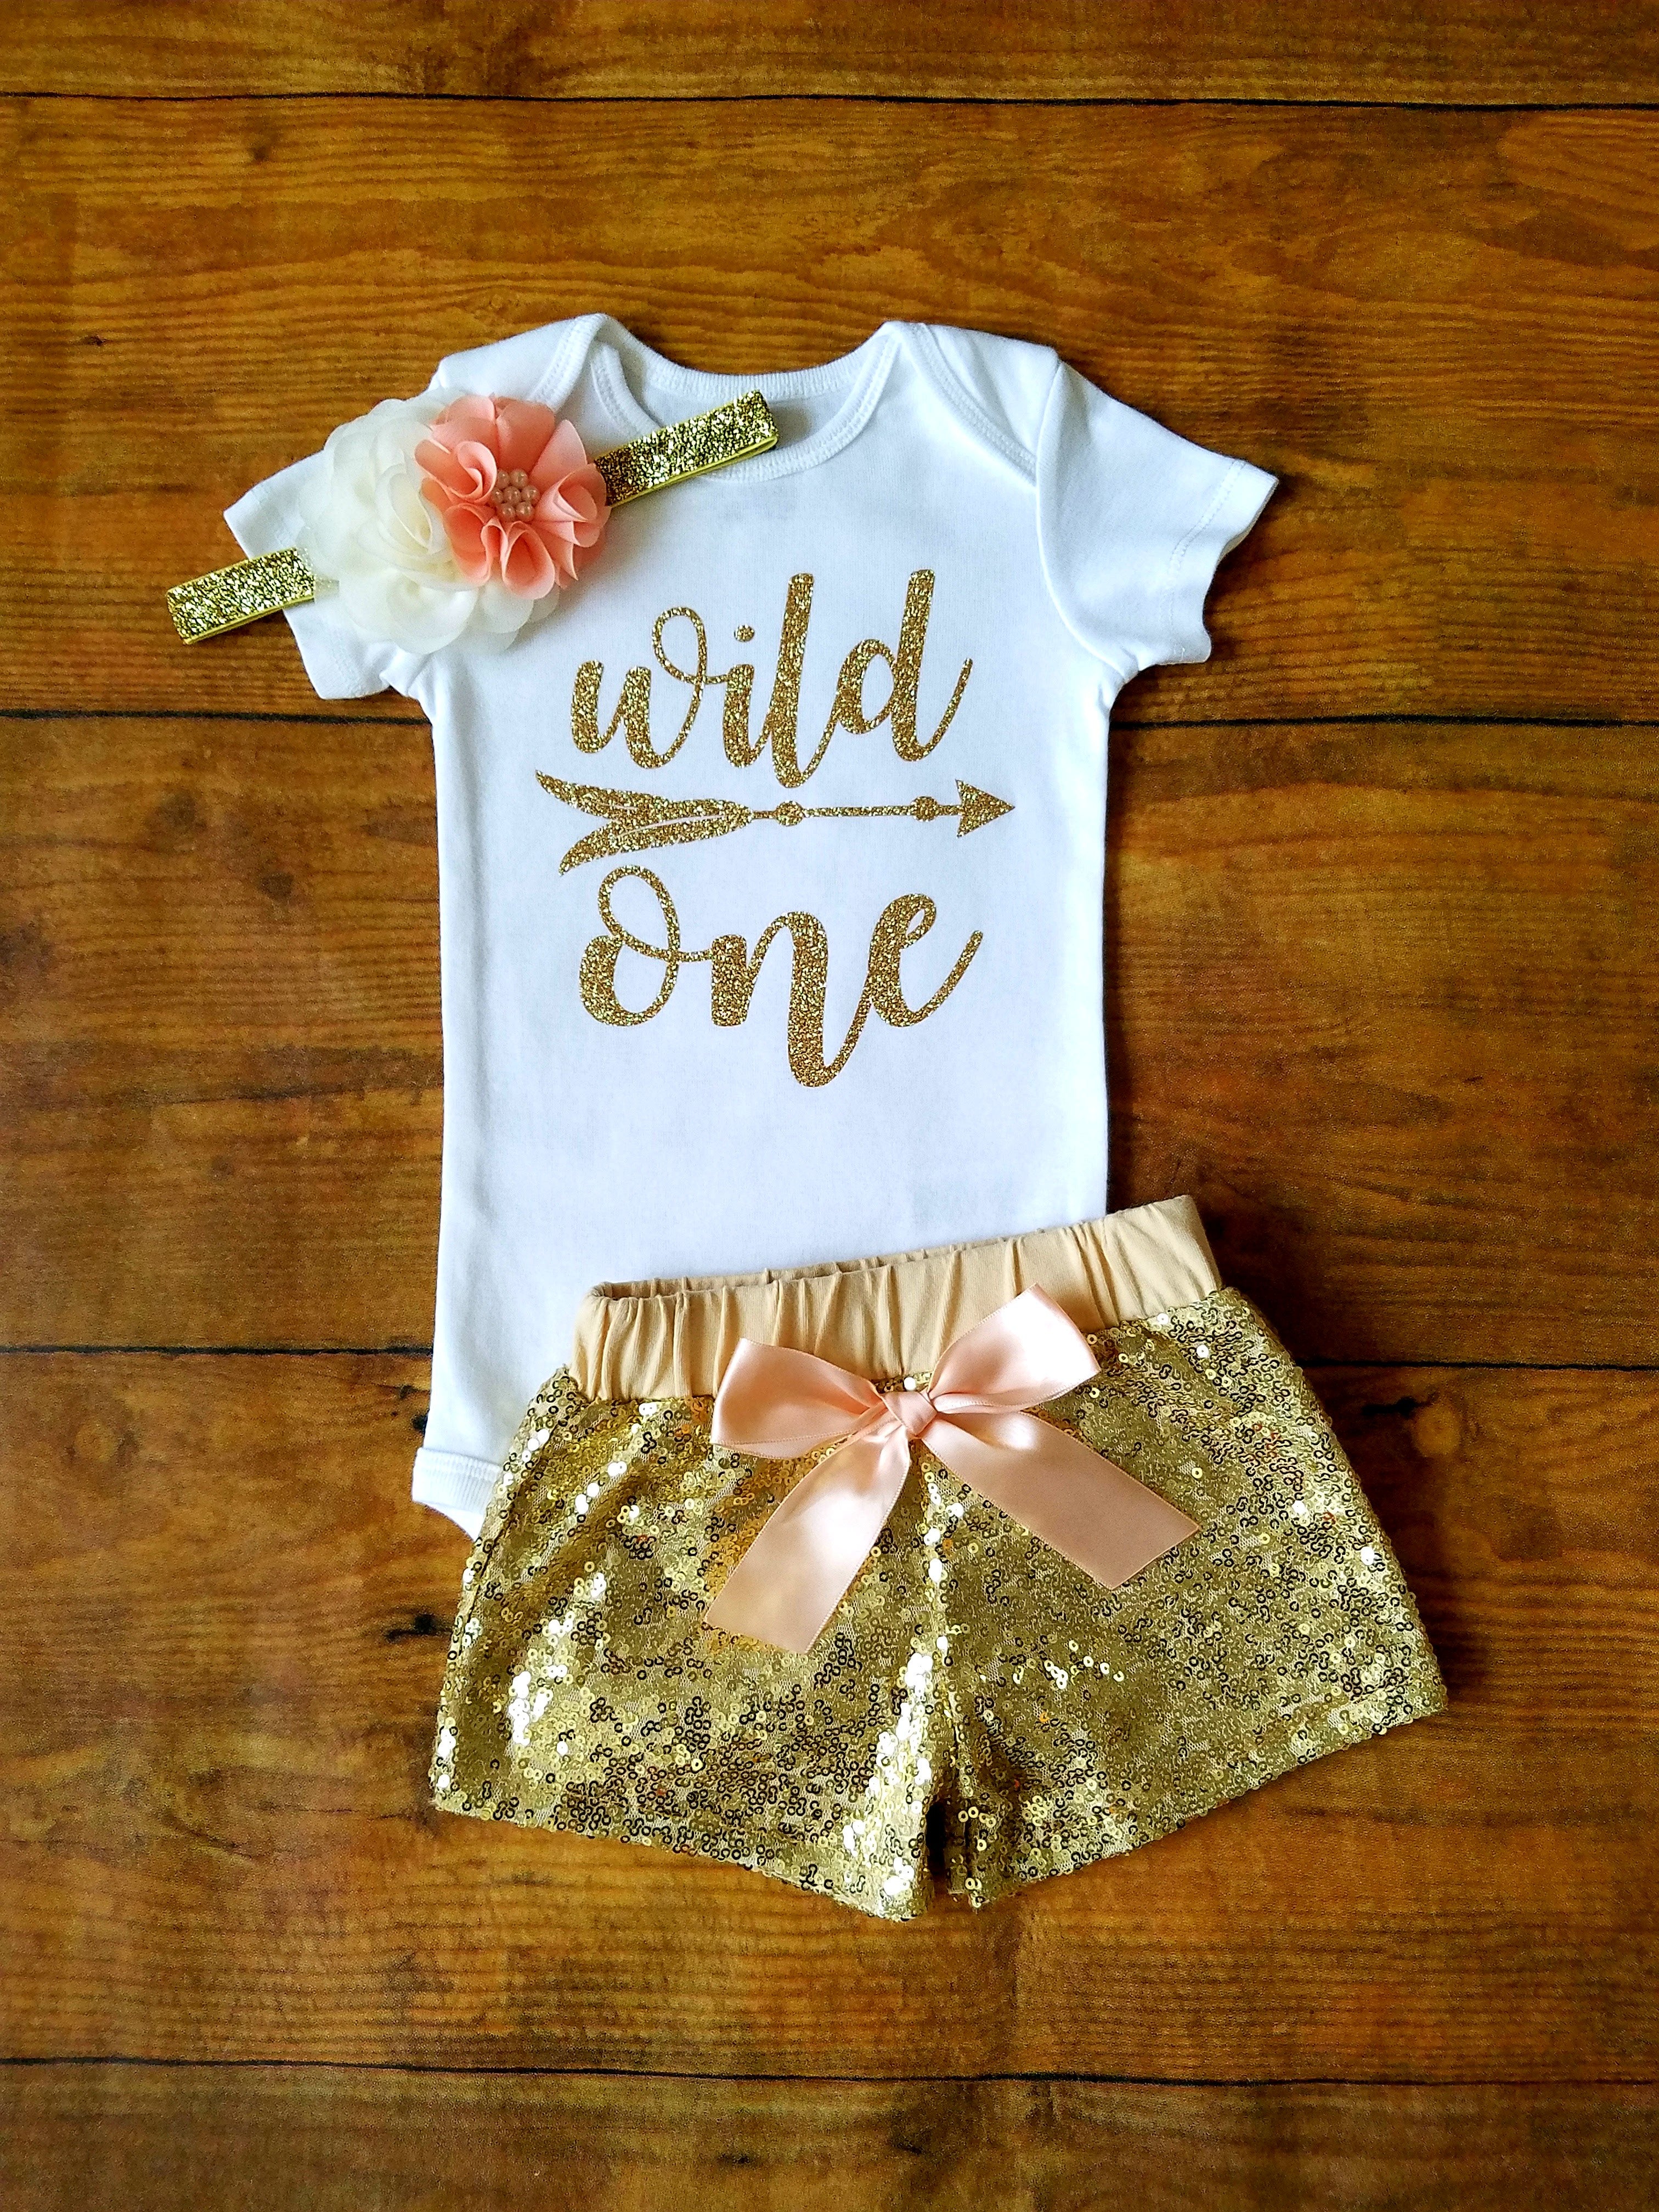 wild one outfit girl